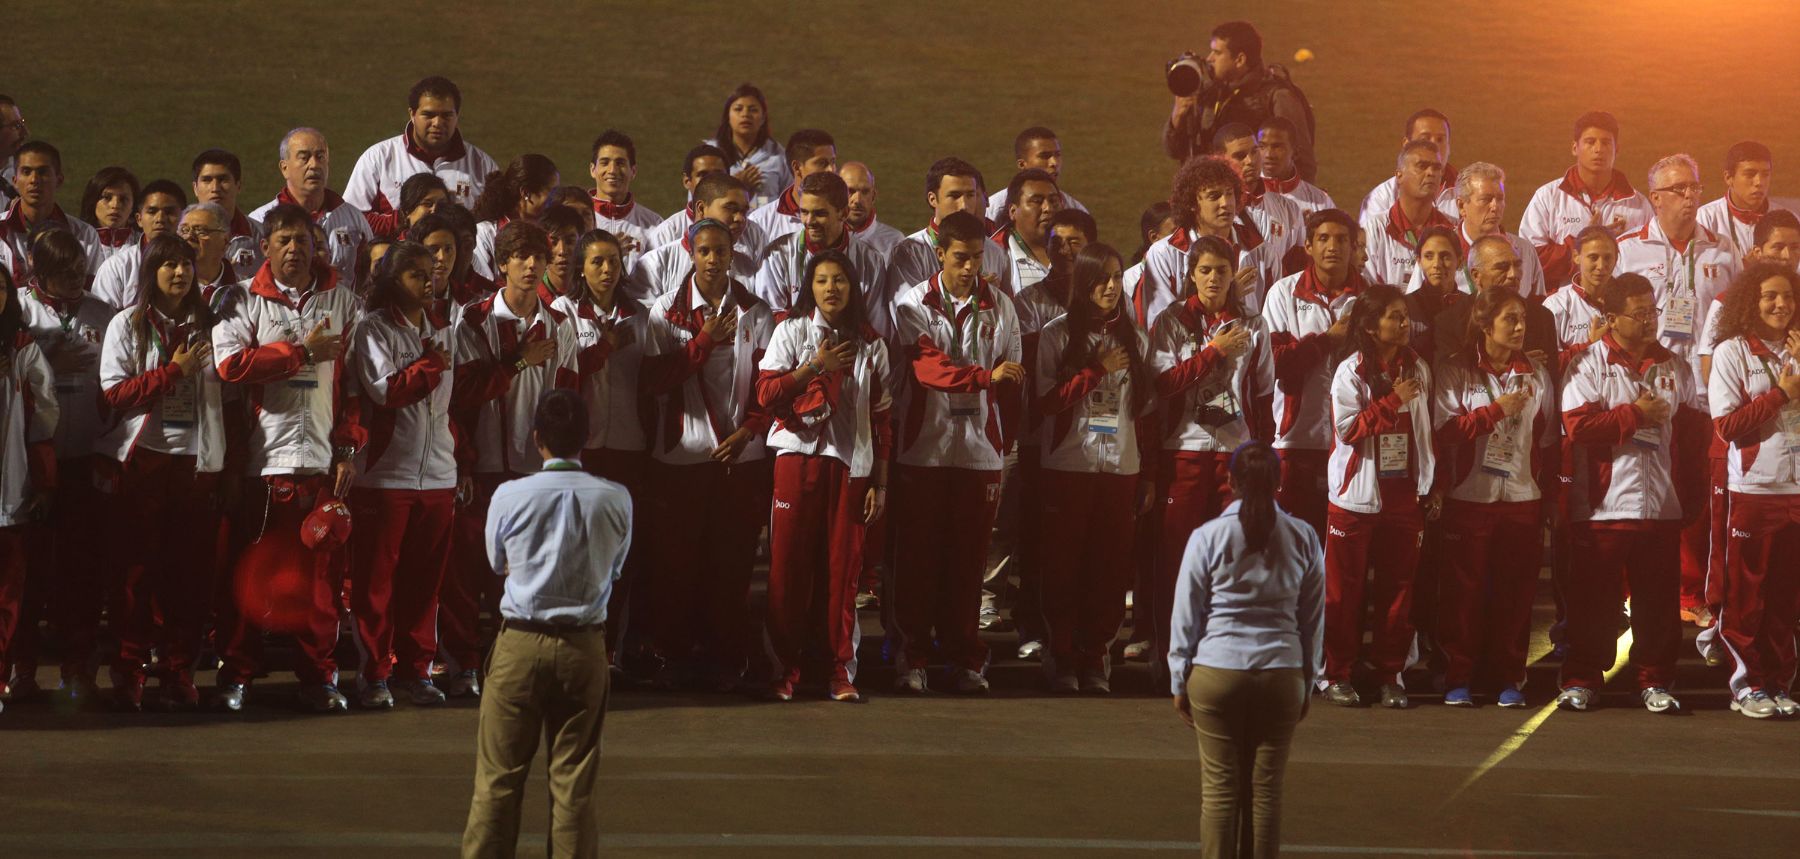 Chile will host the 2014 South American Games from March 7-18 in Santiago.